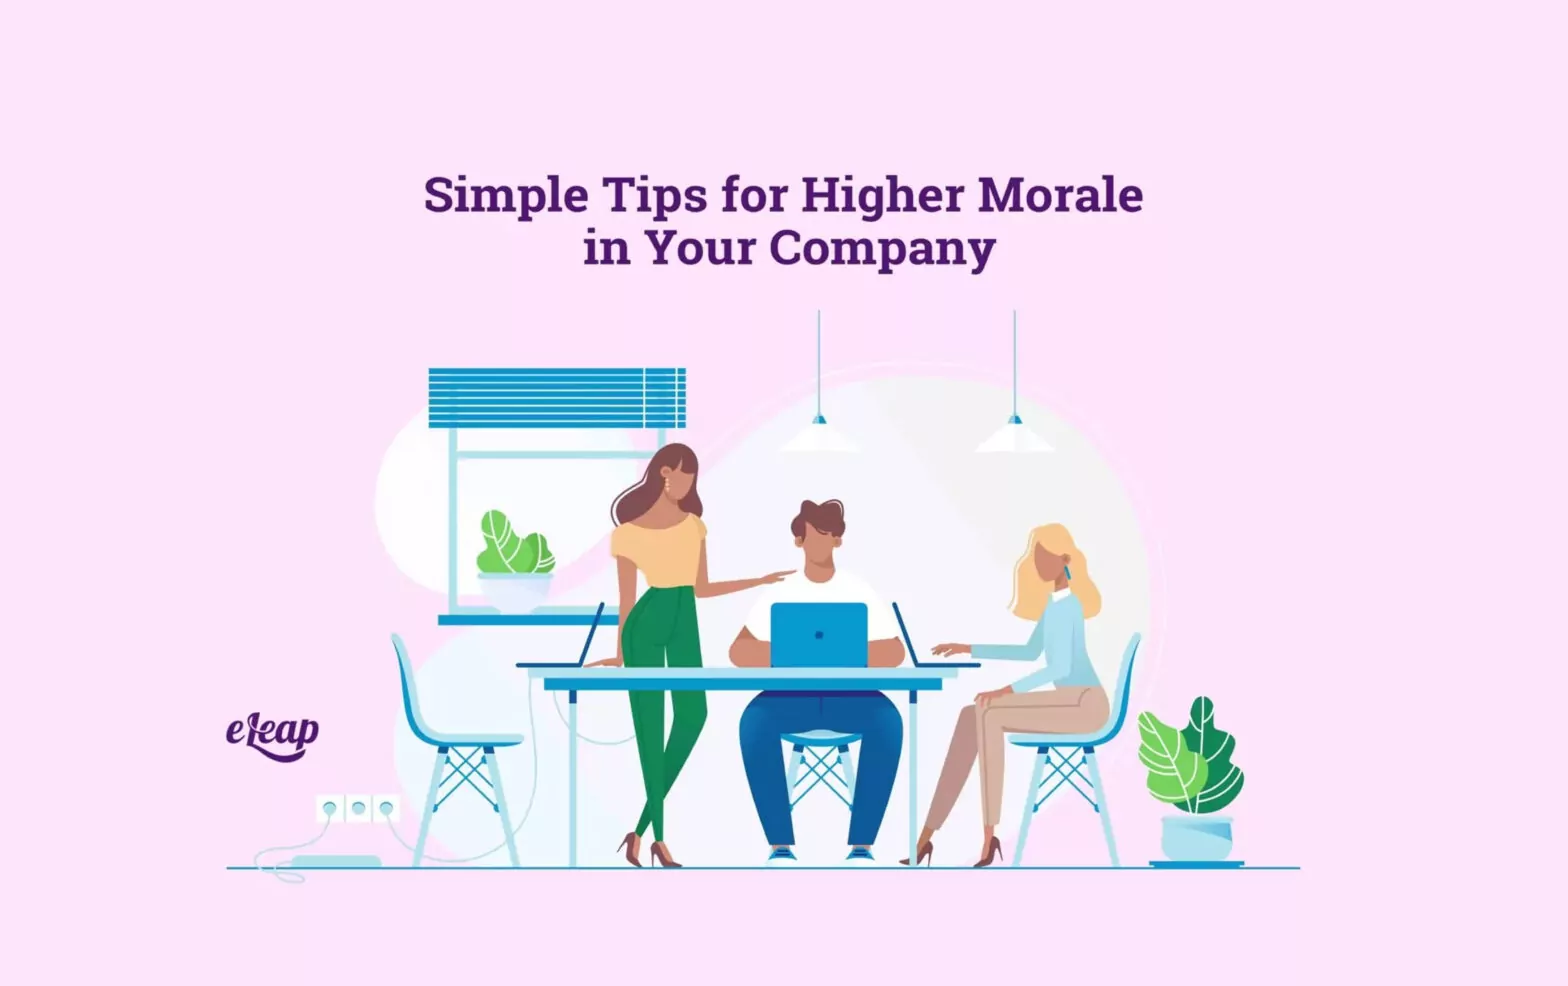 Simple Tips for Higher Morale in Your Company